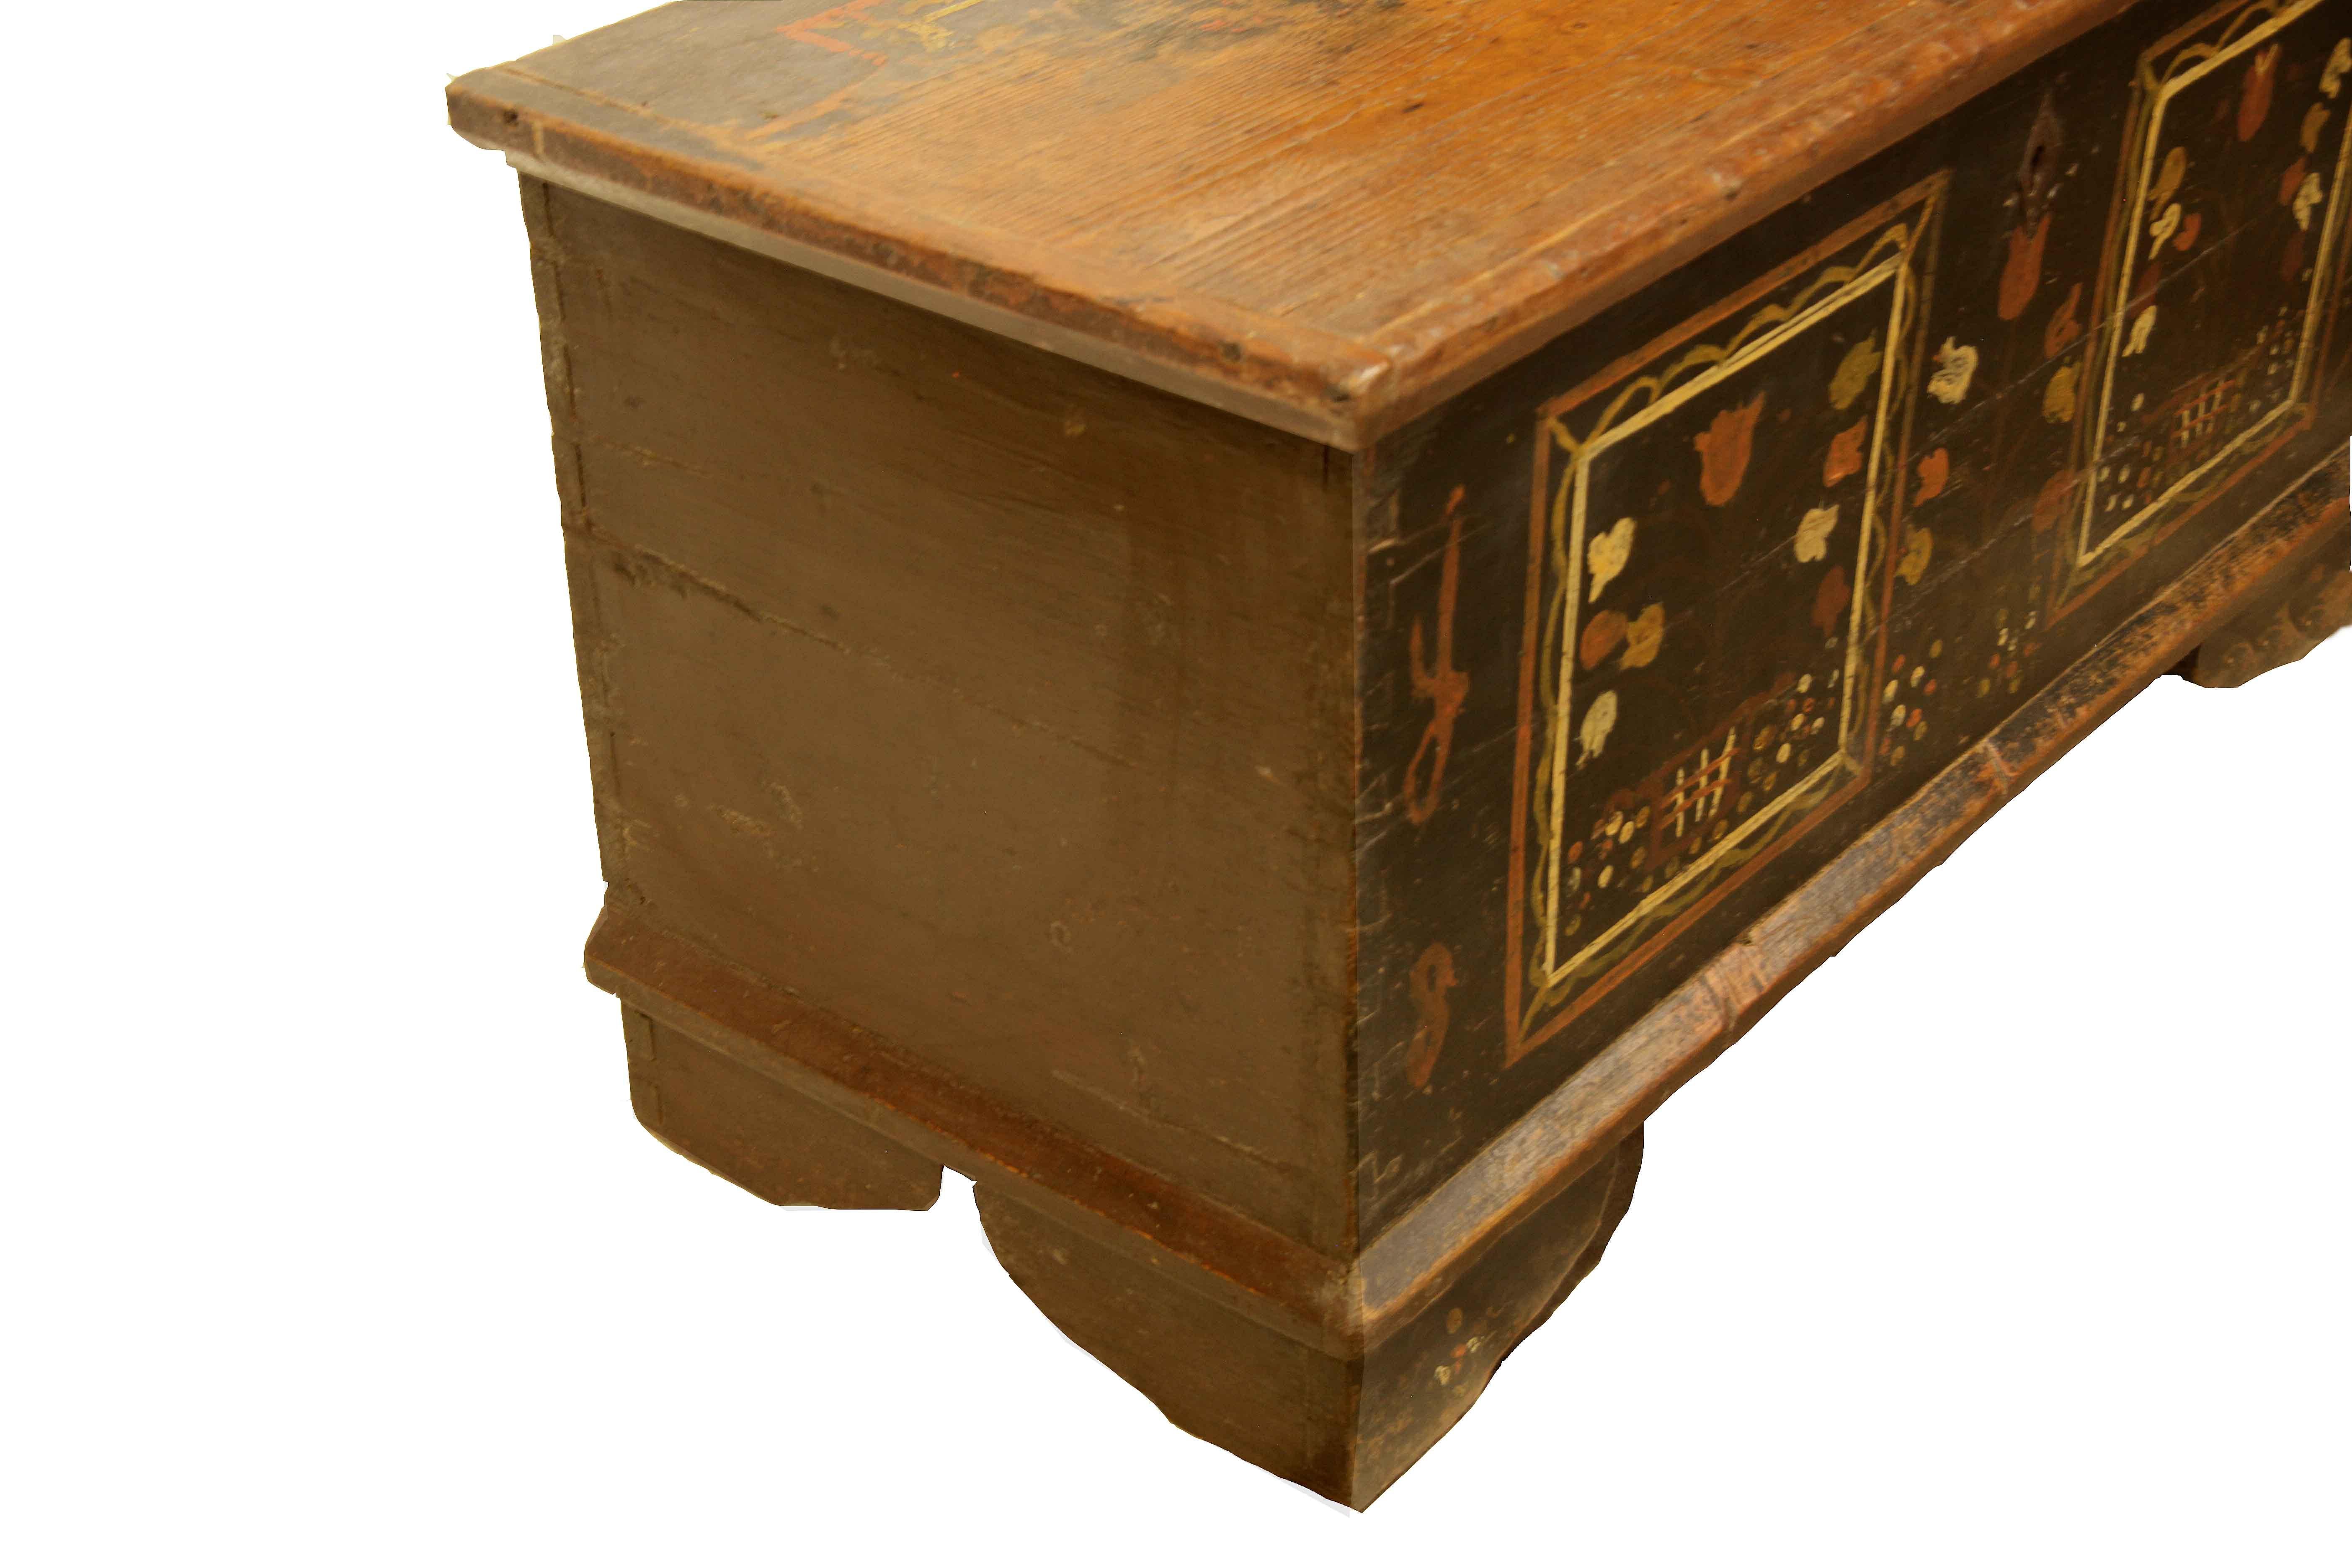 Central European painted blanket chest,  the back portion of the top retains remnants of the original paint decoration (similar to the front of the piece), the front portion of the top is worn to the pine grain and has a warm color and patina.  The